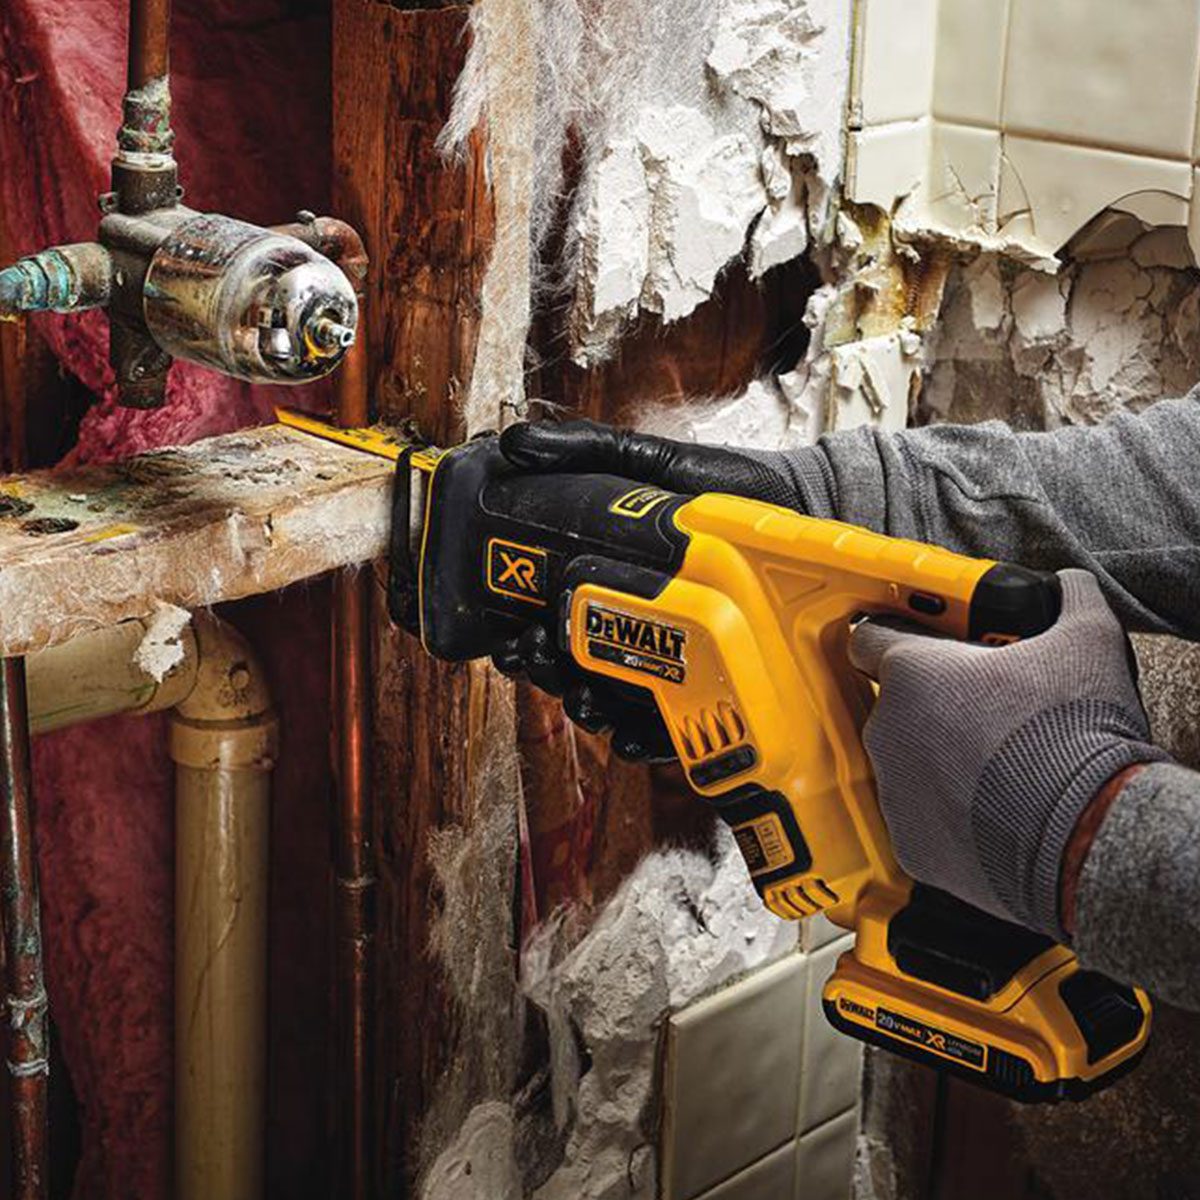 Genius Reciprocating Saw Pro Tips That Will Save You Time and Money